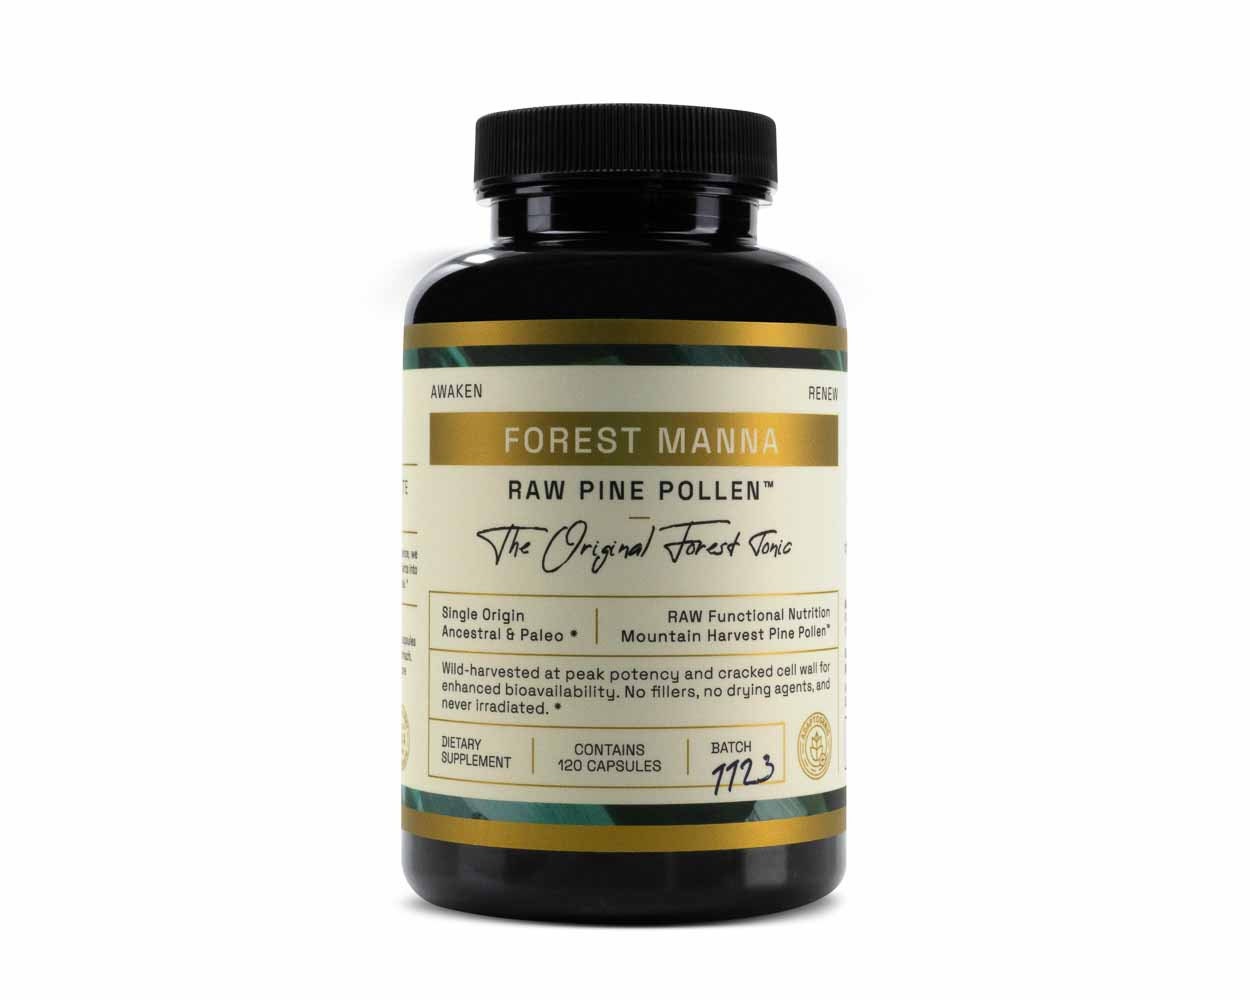 Elevated Pine Pollen & Stinging Nettle Root Capsules » RAW Forest Foods